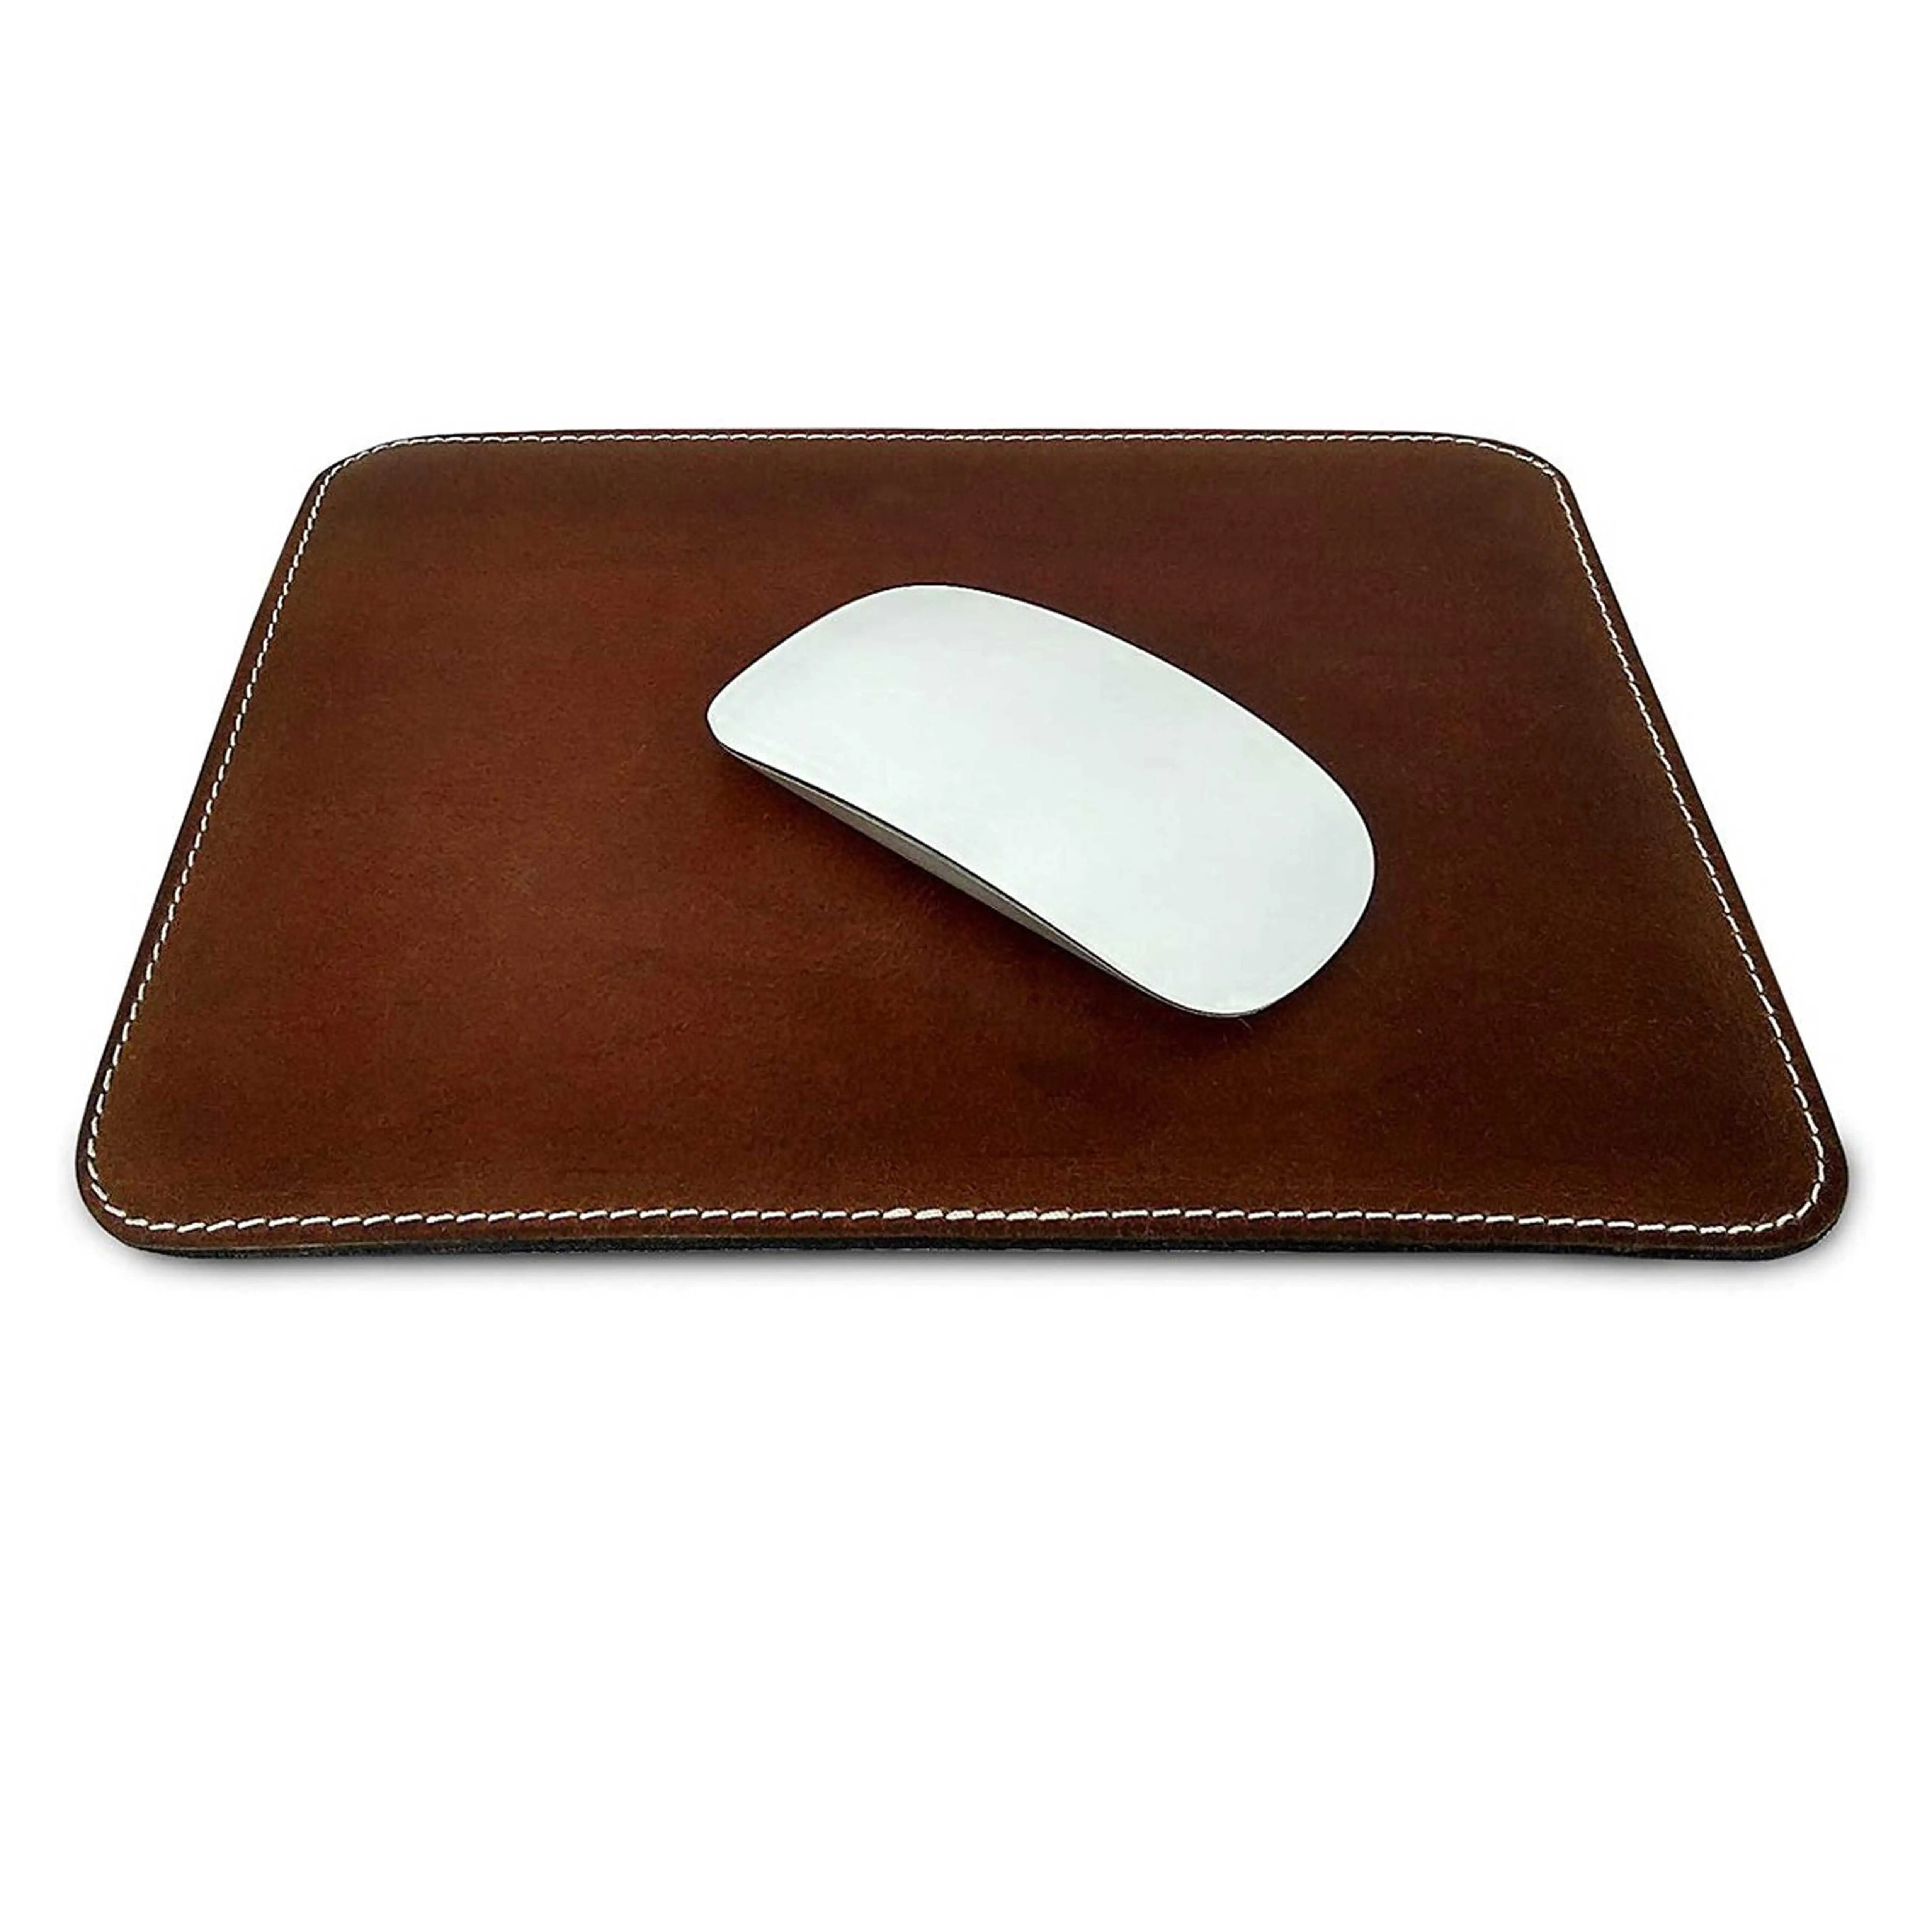 HANDMADE PERSONLIZED CUSTOM LEATHER MOUSE PAD FOR OFFICE AND HOUSE WITH YOUR NAME AND LOGO